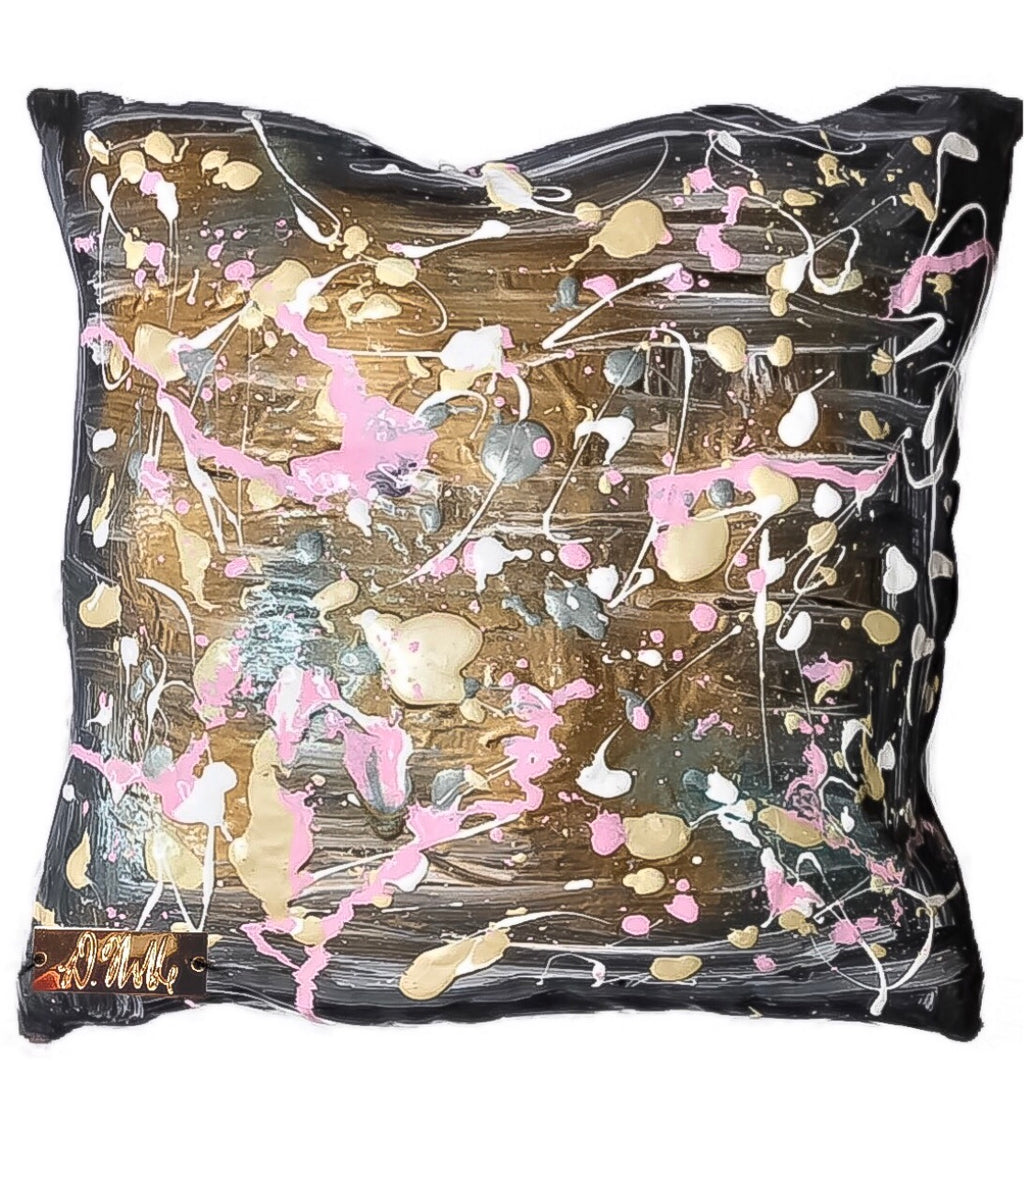 Polka Phase - Hand Painted Abstract Art Throw Pillow